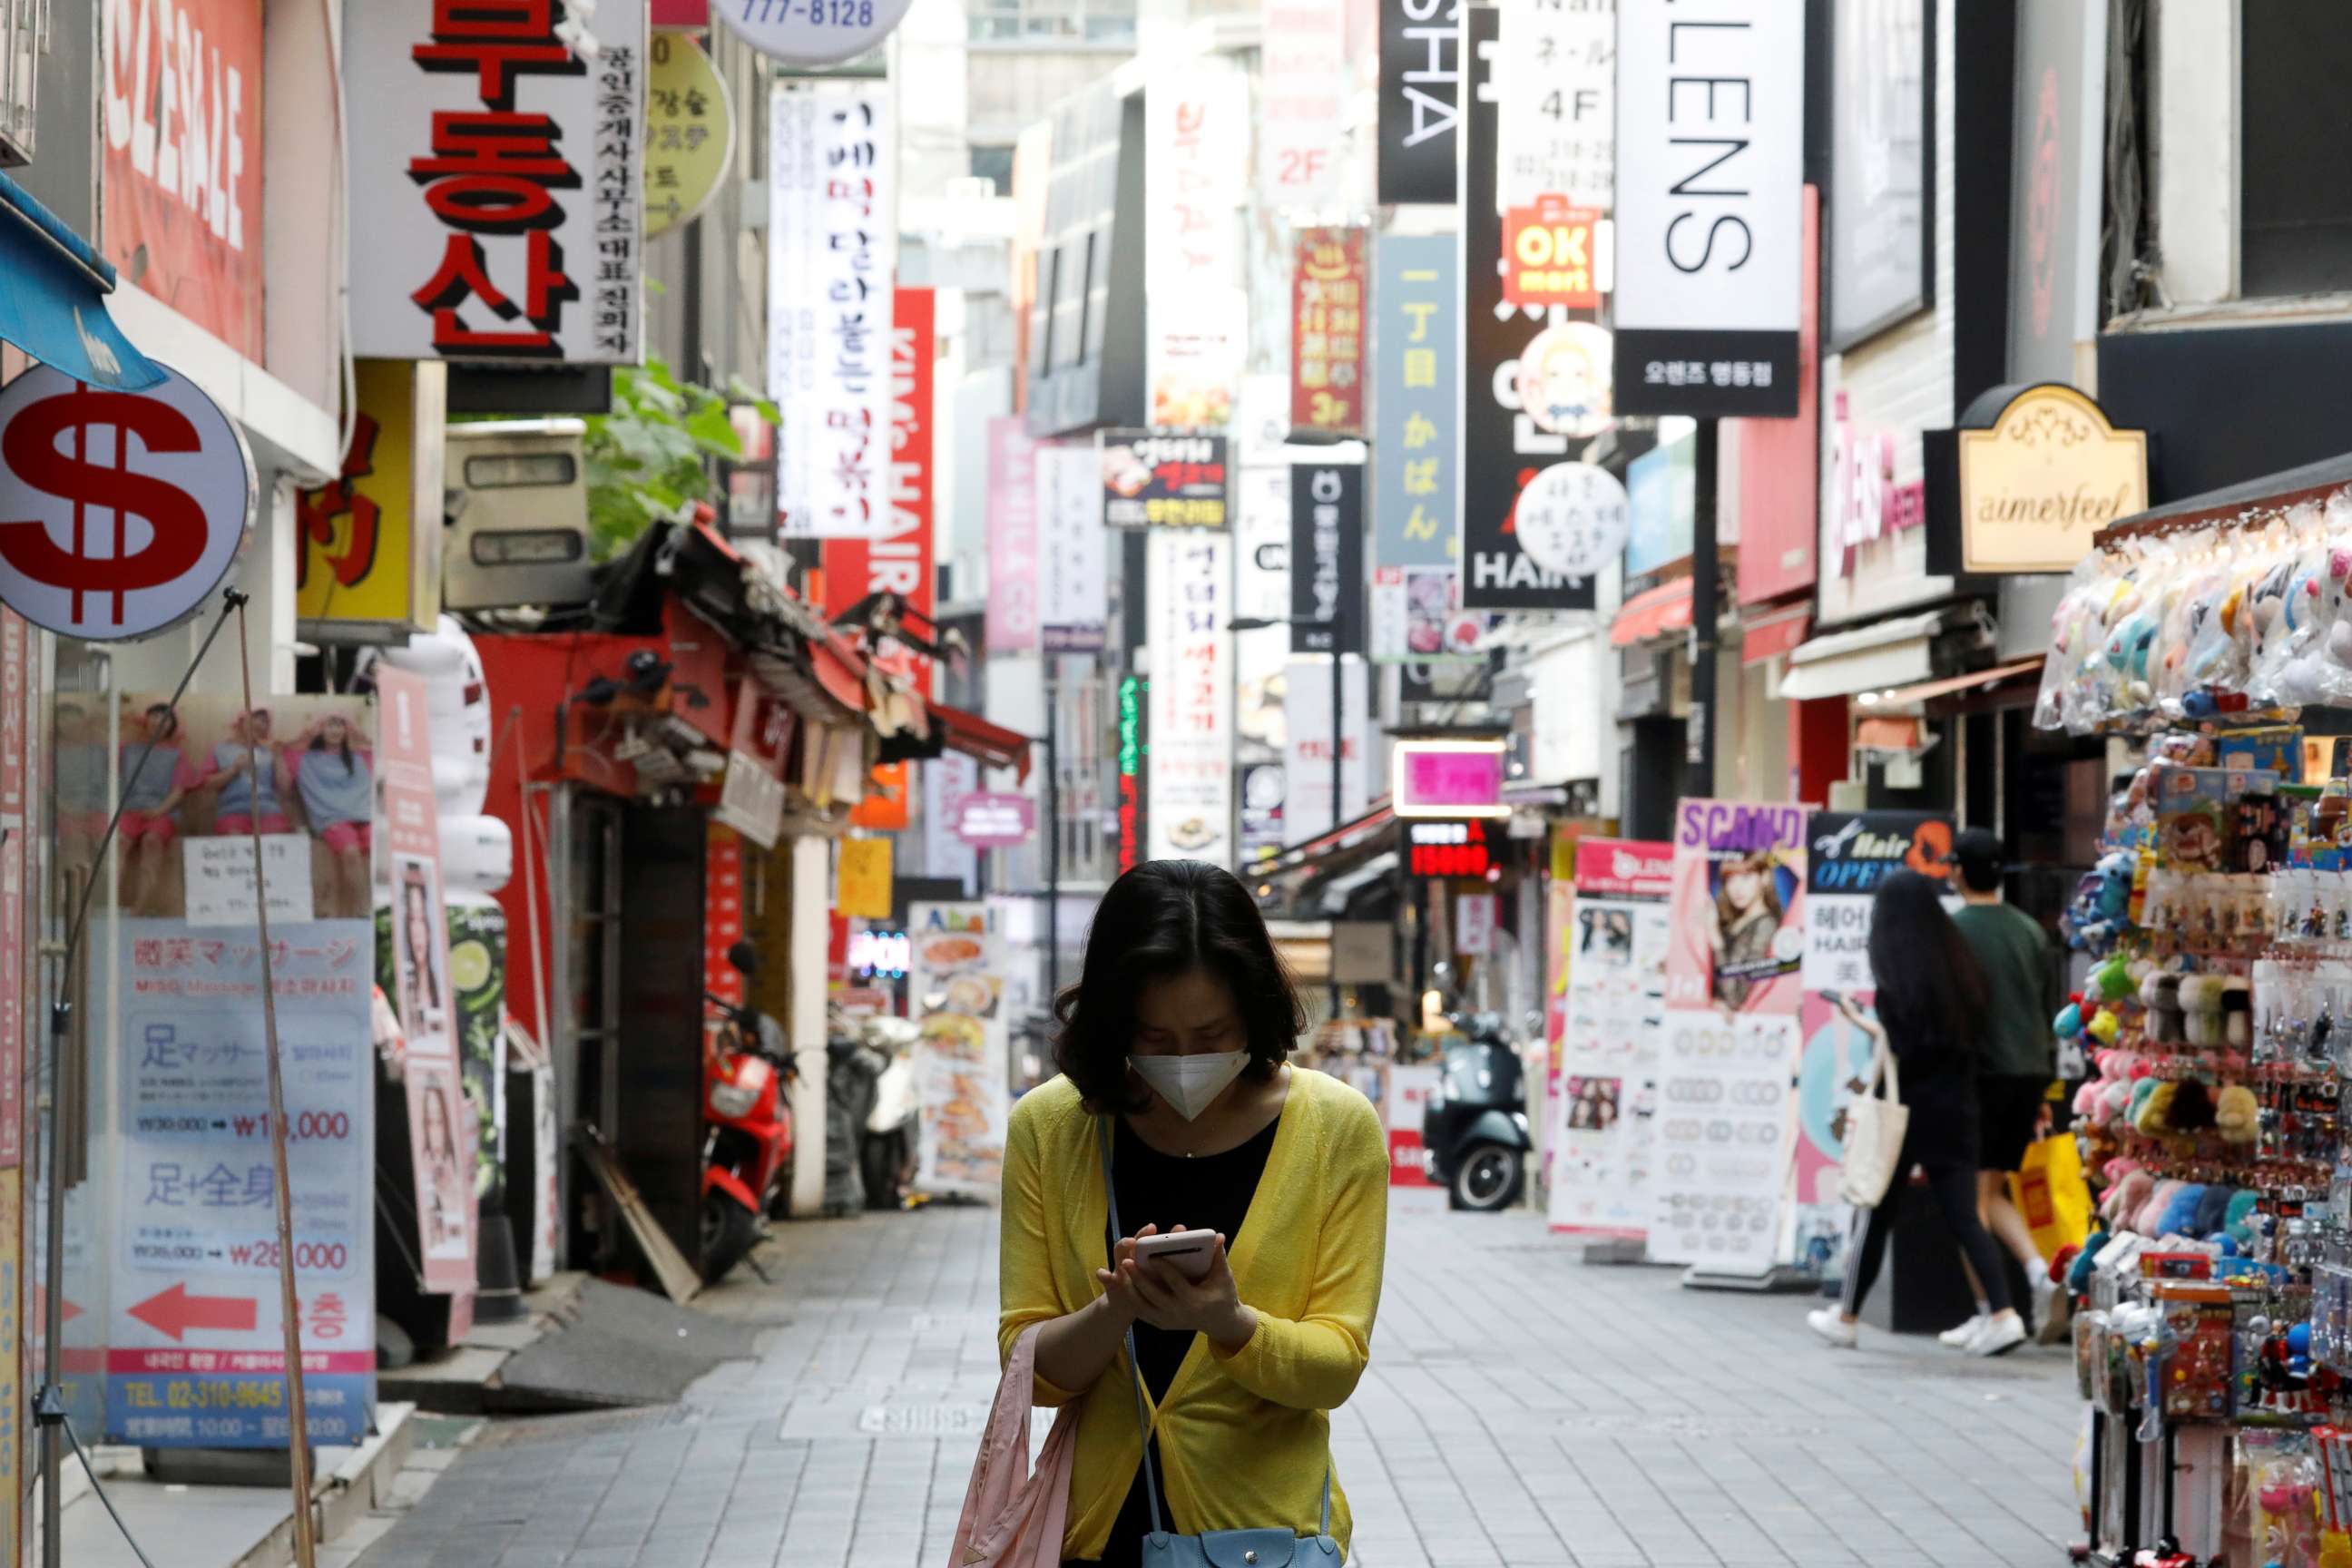 PHOTO: A woman wearing a mask looks at her mobile phone amid social distancing measures to avoid the spread of the coronavirus disease (COVID-19), in Myeongdong shopping district in Seoul, South Korea, May 28, 2020.